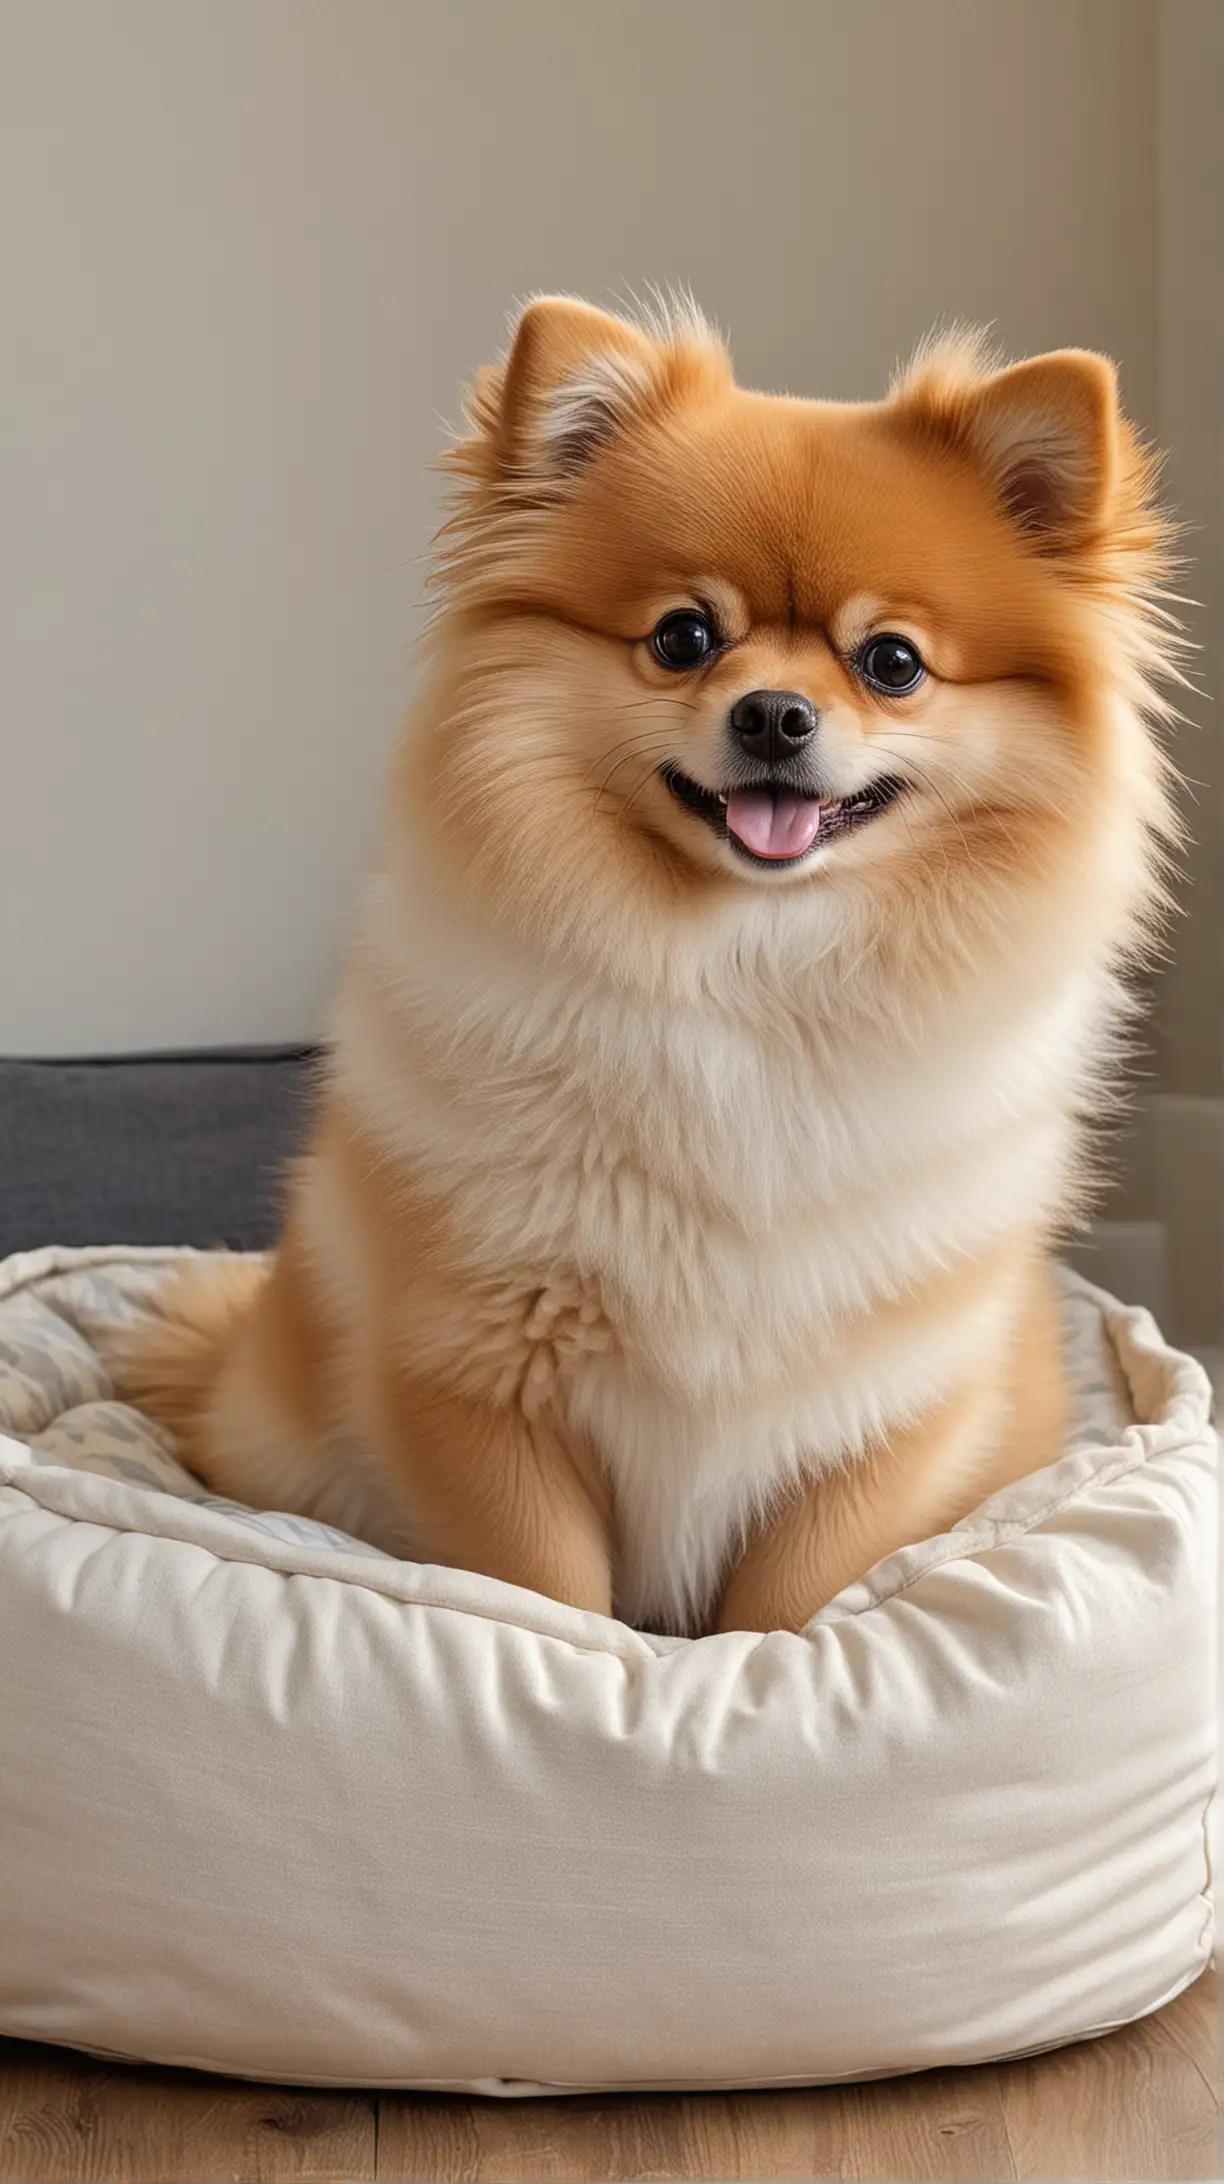 image of a cute pomeranian dog sitting up in his doggie bed
